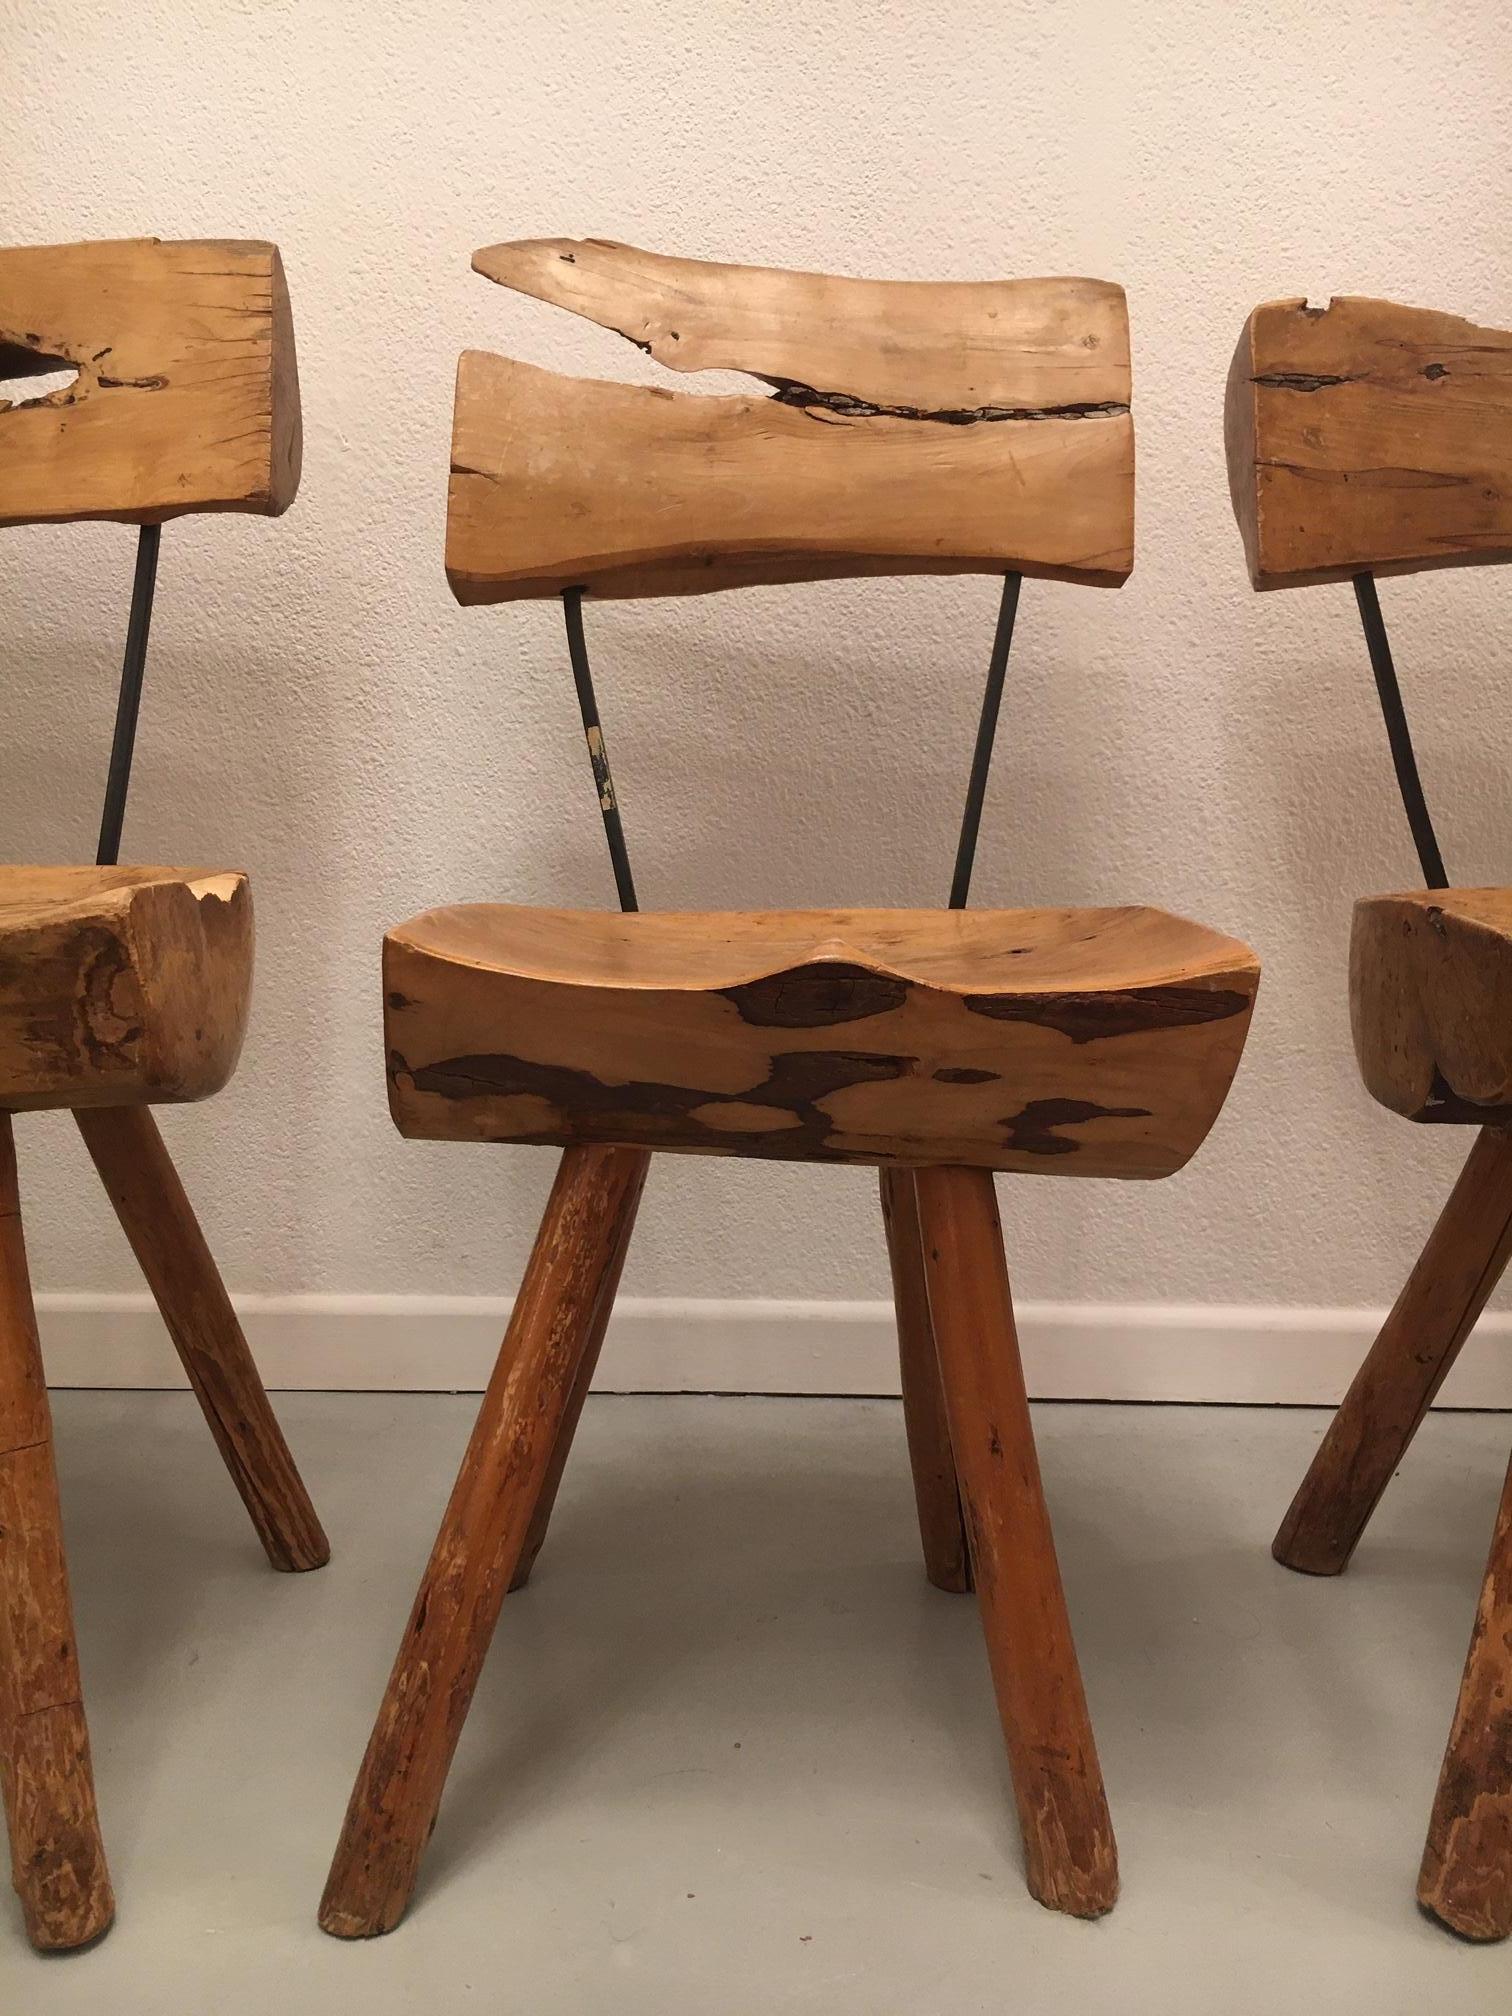 Mid-20th Century Set of 5 Solid Olive Wood Brutalist Rustic Dining Chairs, circa 1950s